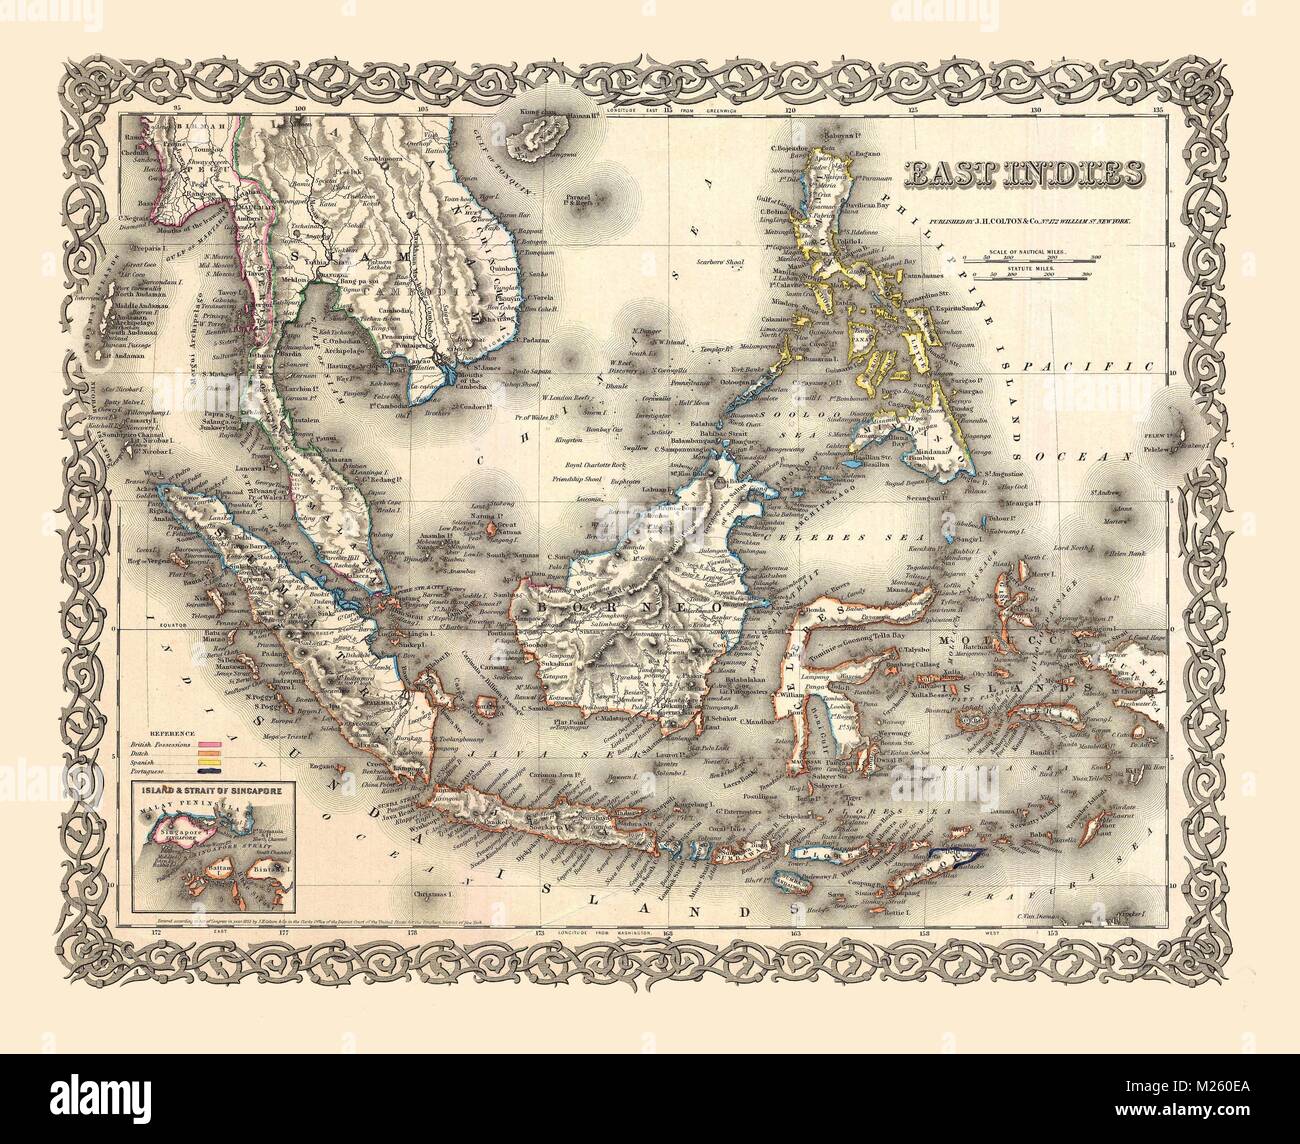 Historical map of the East Indies circa 1855. Stock Photo